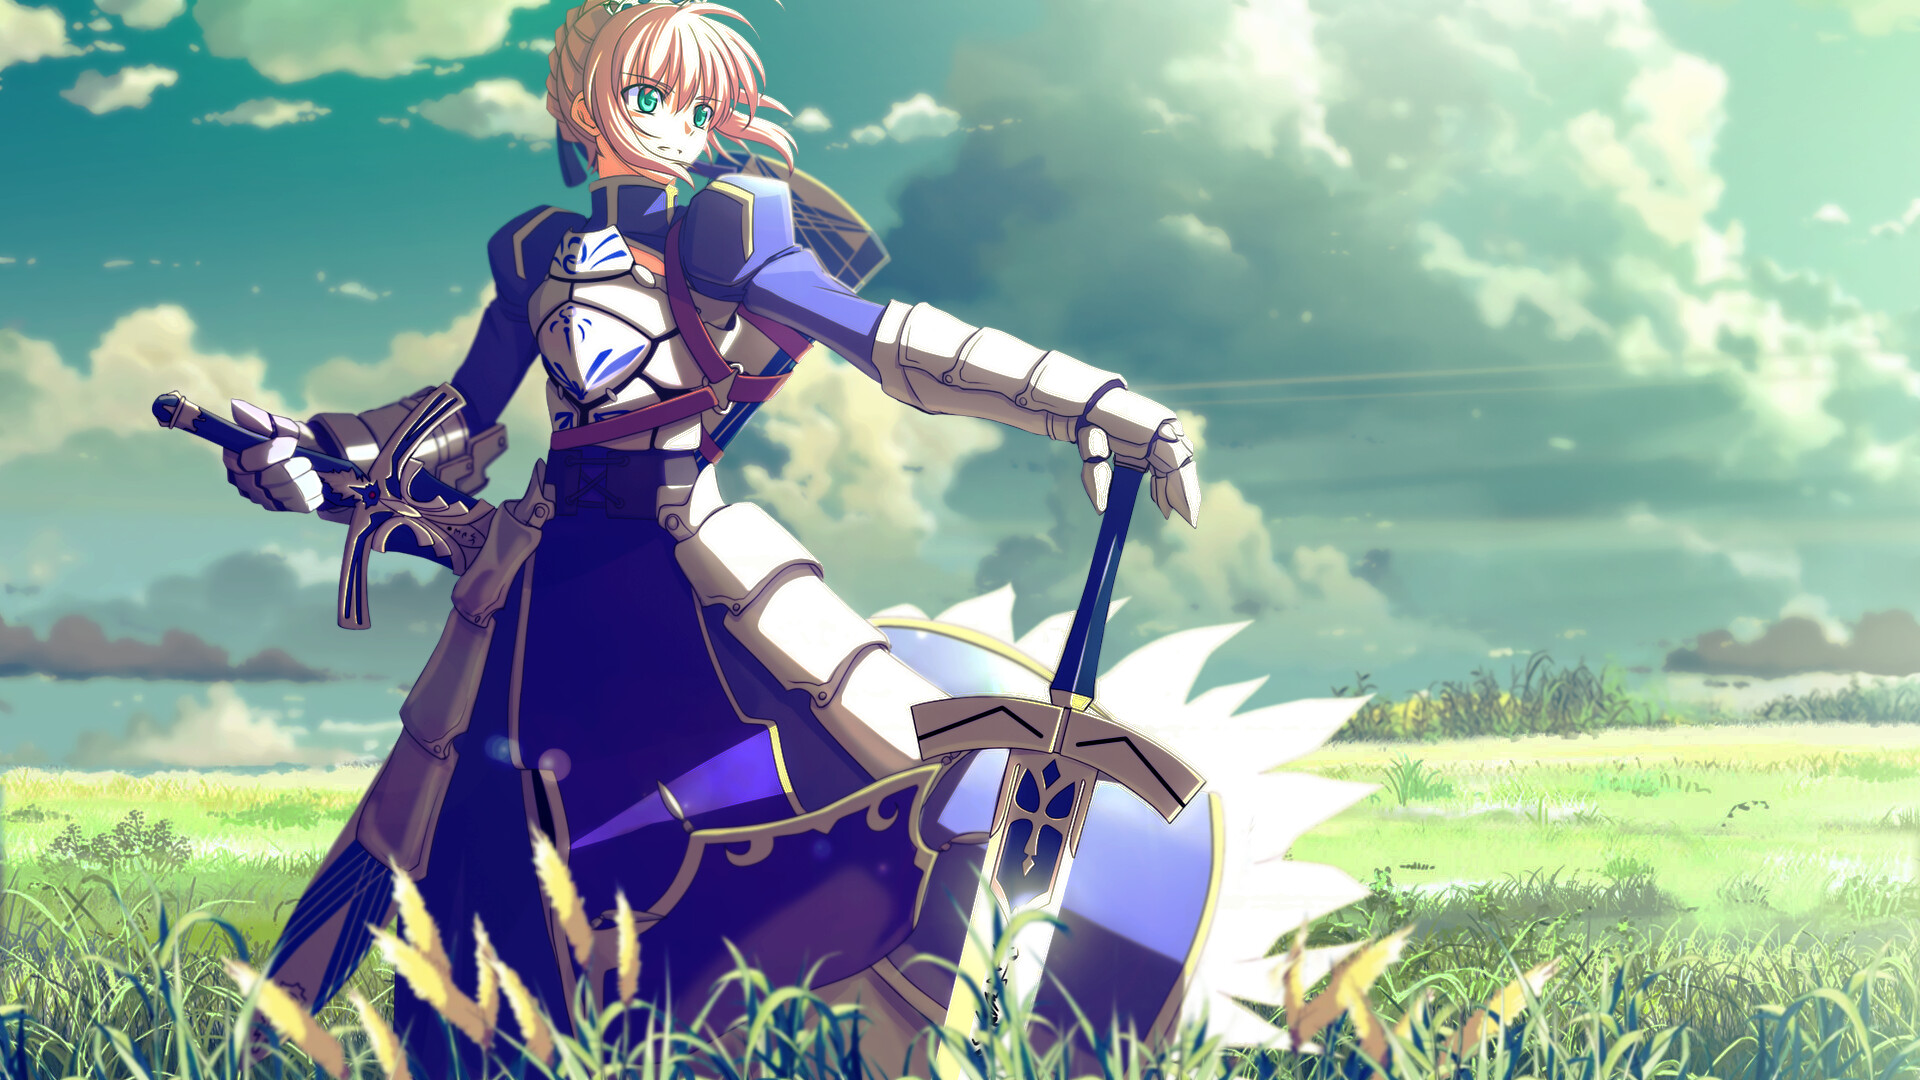 Fate/stay night, Saber wallpapers, Fate series, 1920x1080 Full HD Desktop